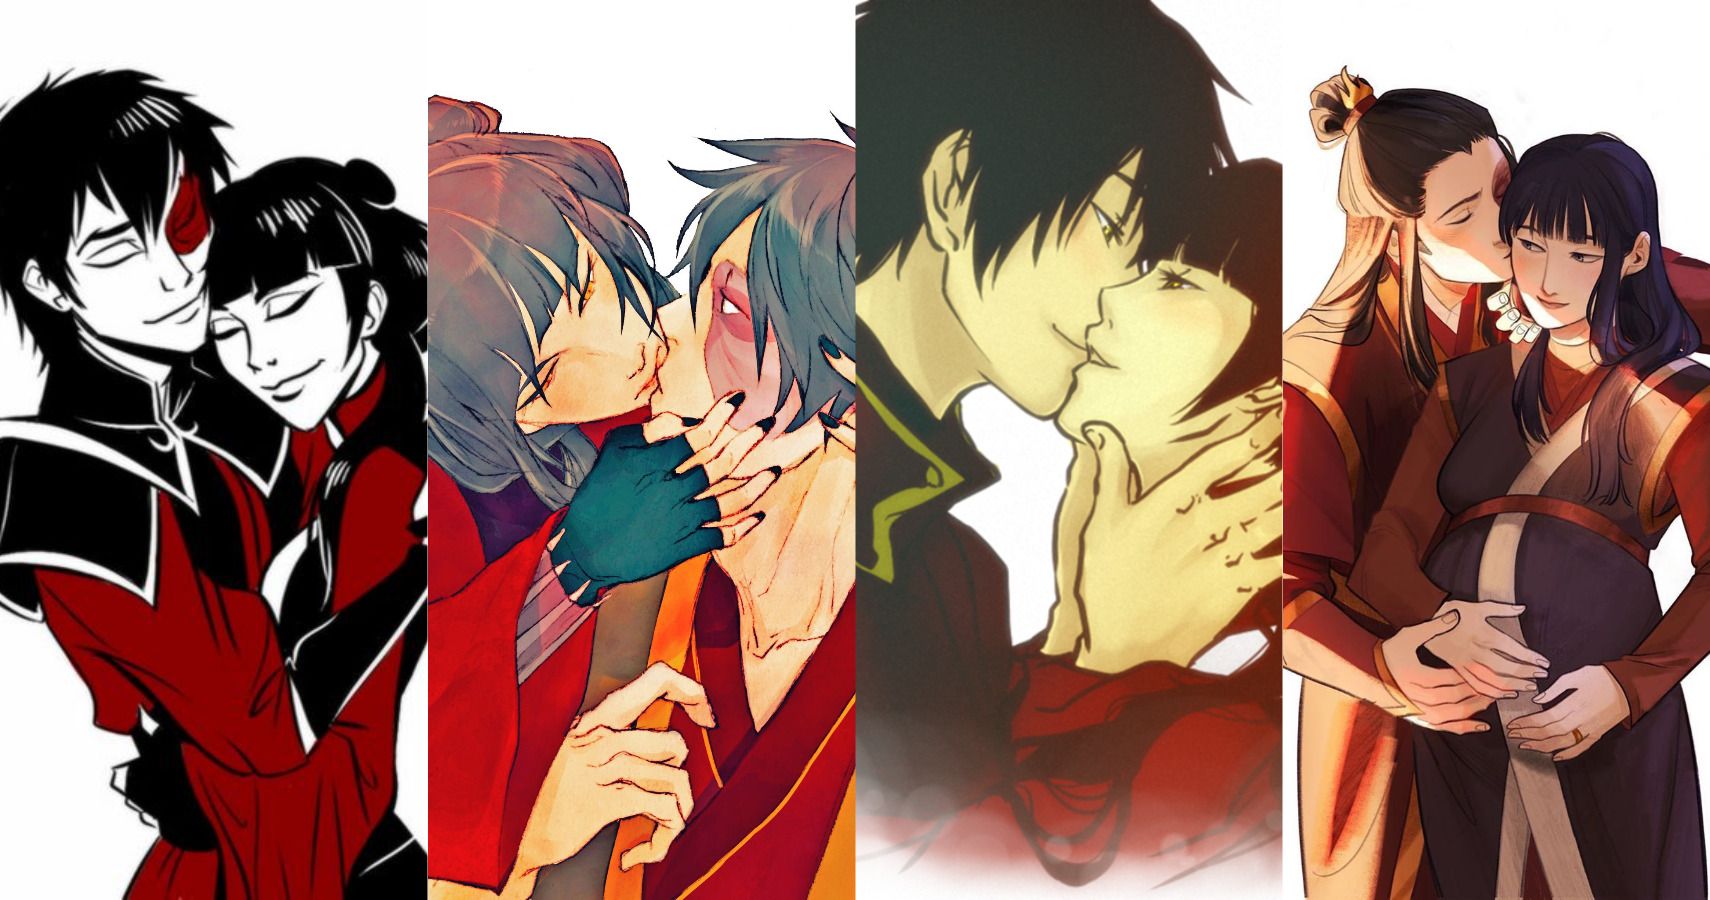 udledning Telegraf Flyve drage 10 Pieces Of Zuko & Mai Fan Art That Are Totally Romantic